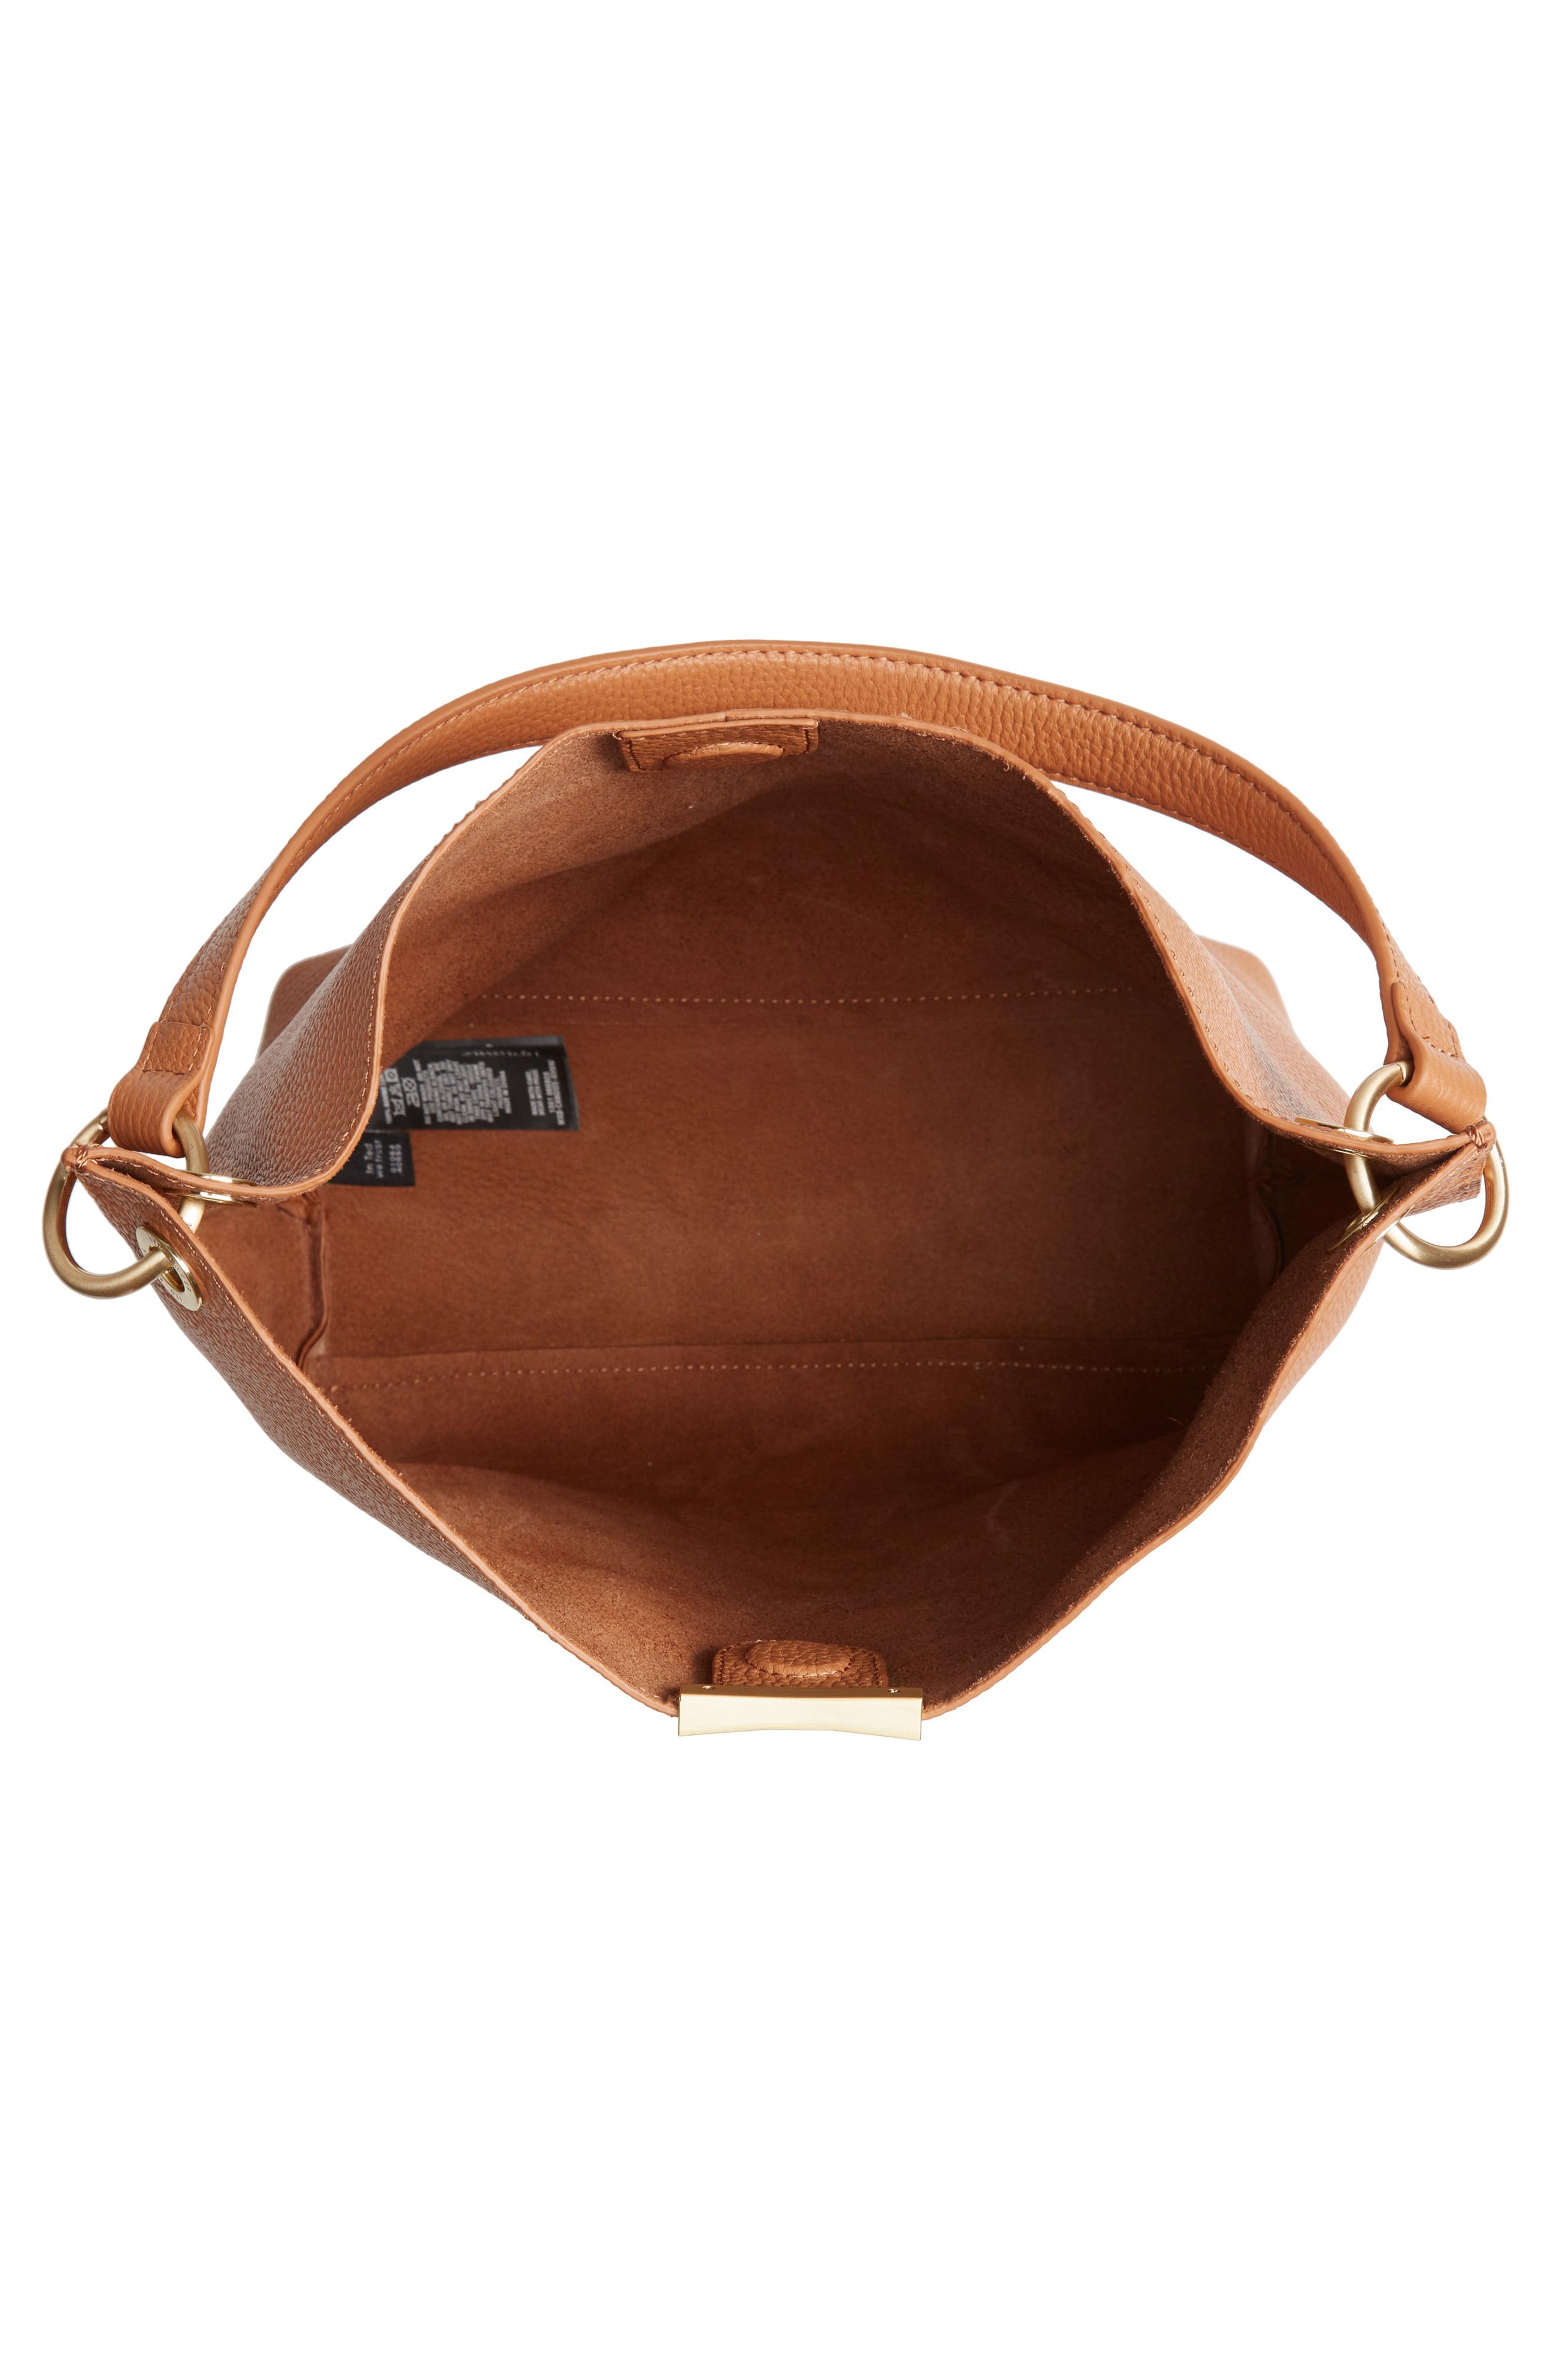 Ted Baker Candiee Bow Leather Hobo in Tan (Brown) - Lyst